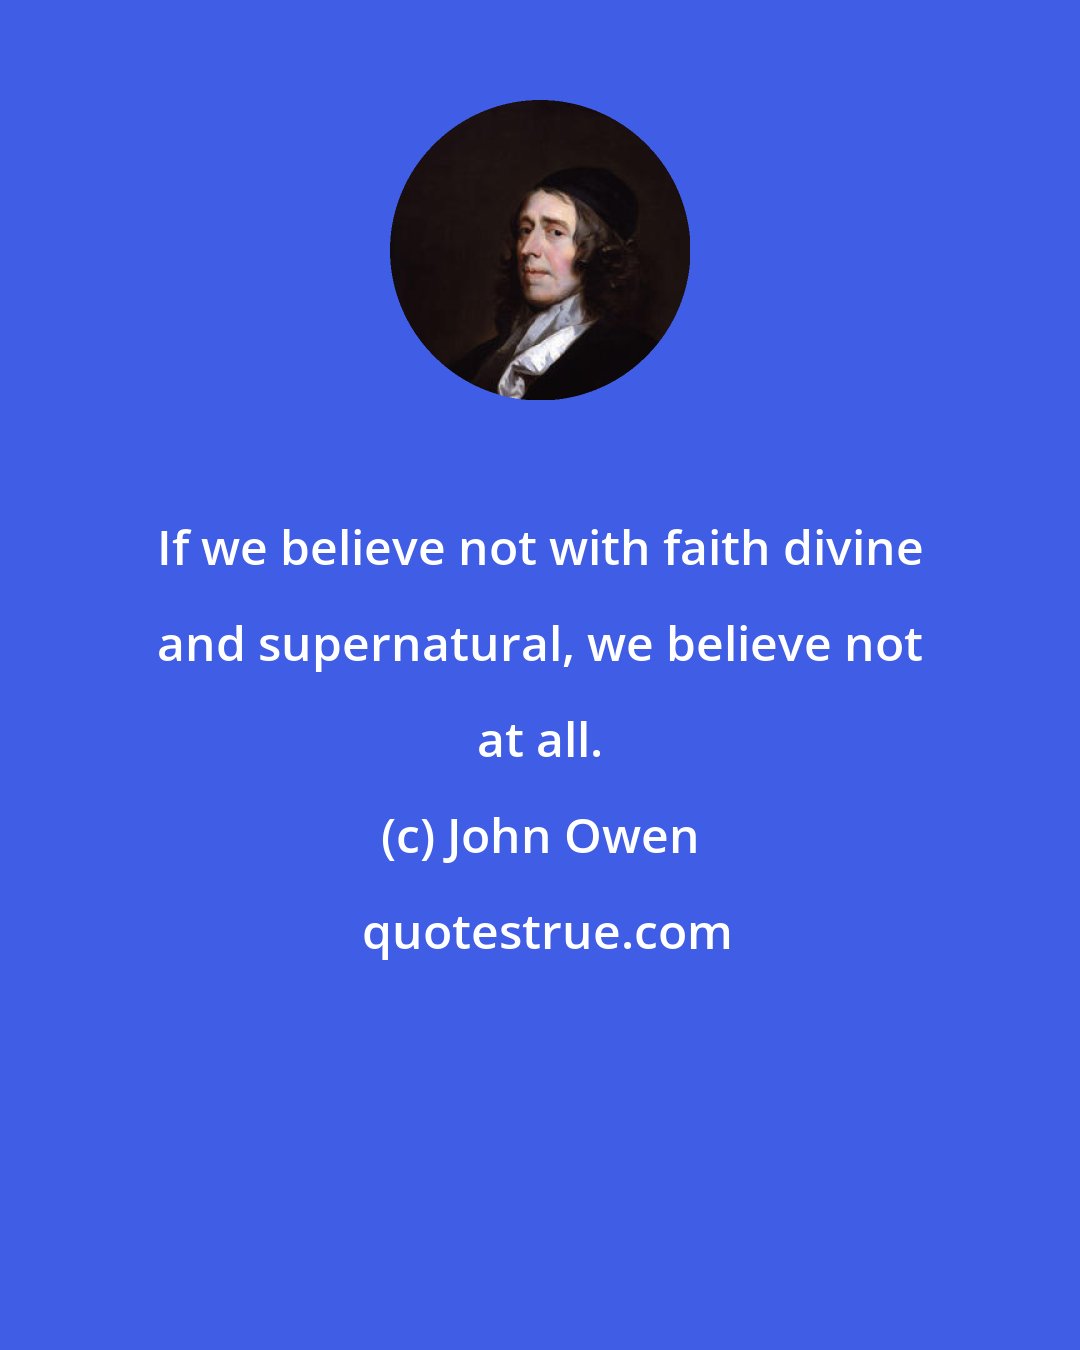 John Owen: If we believe not with faith divine and supernatural, we believe not at all.